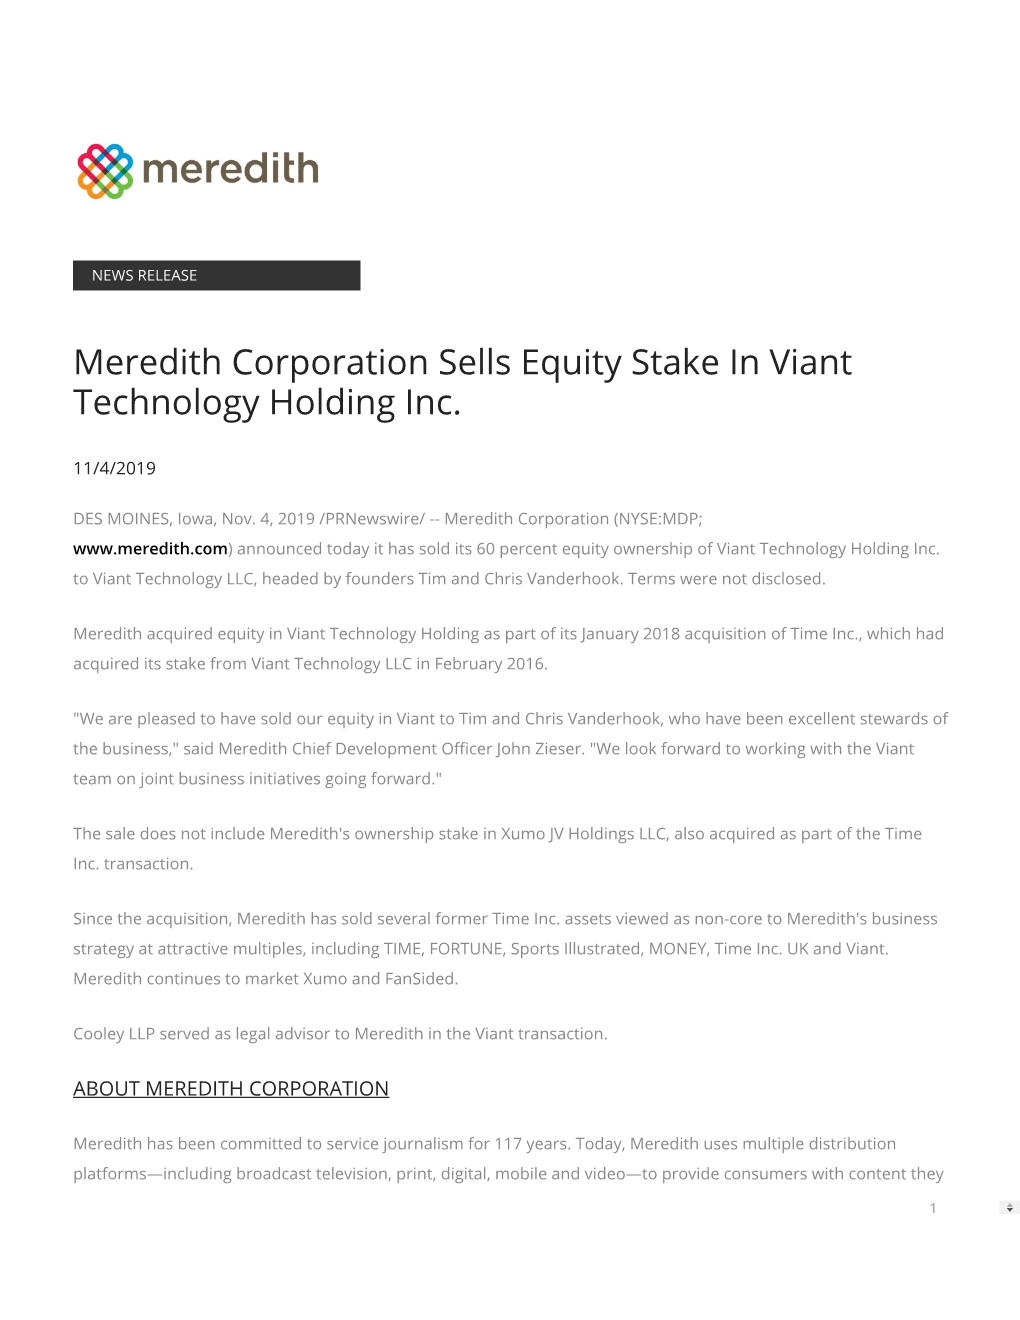 Meredith Corporation Sells Equity Stake in Viant Technology Holding Inc